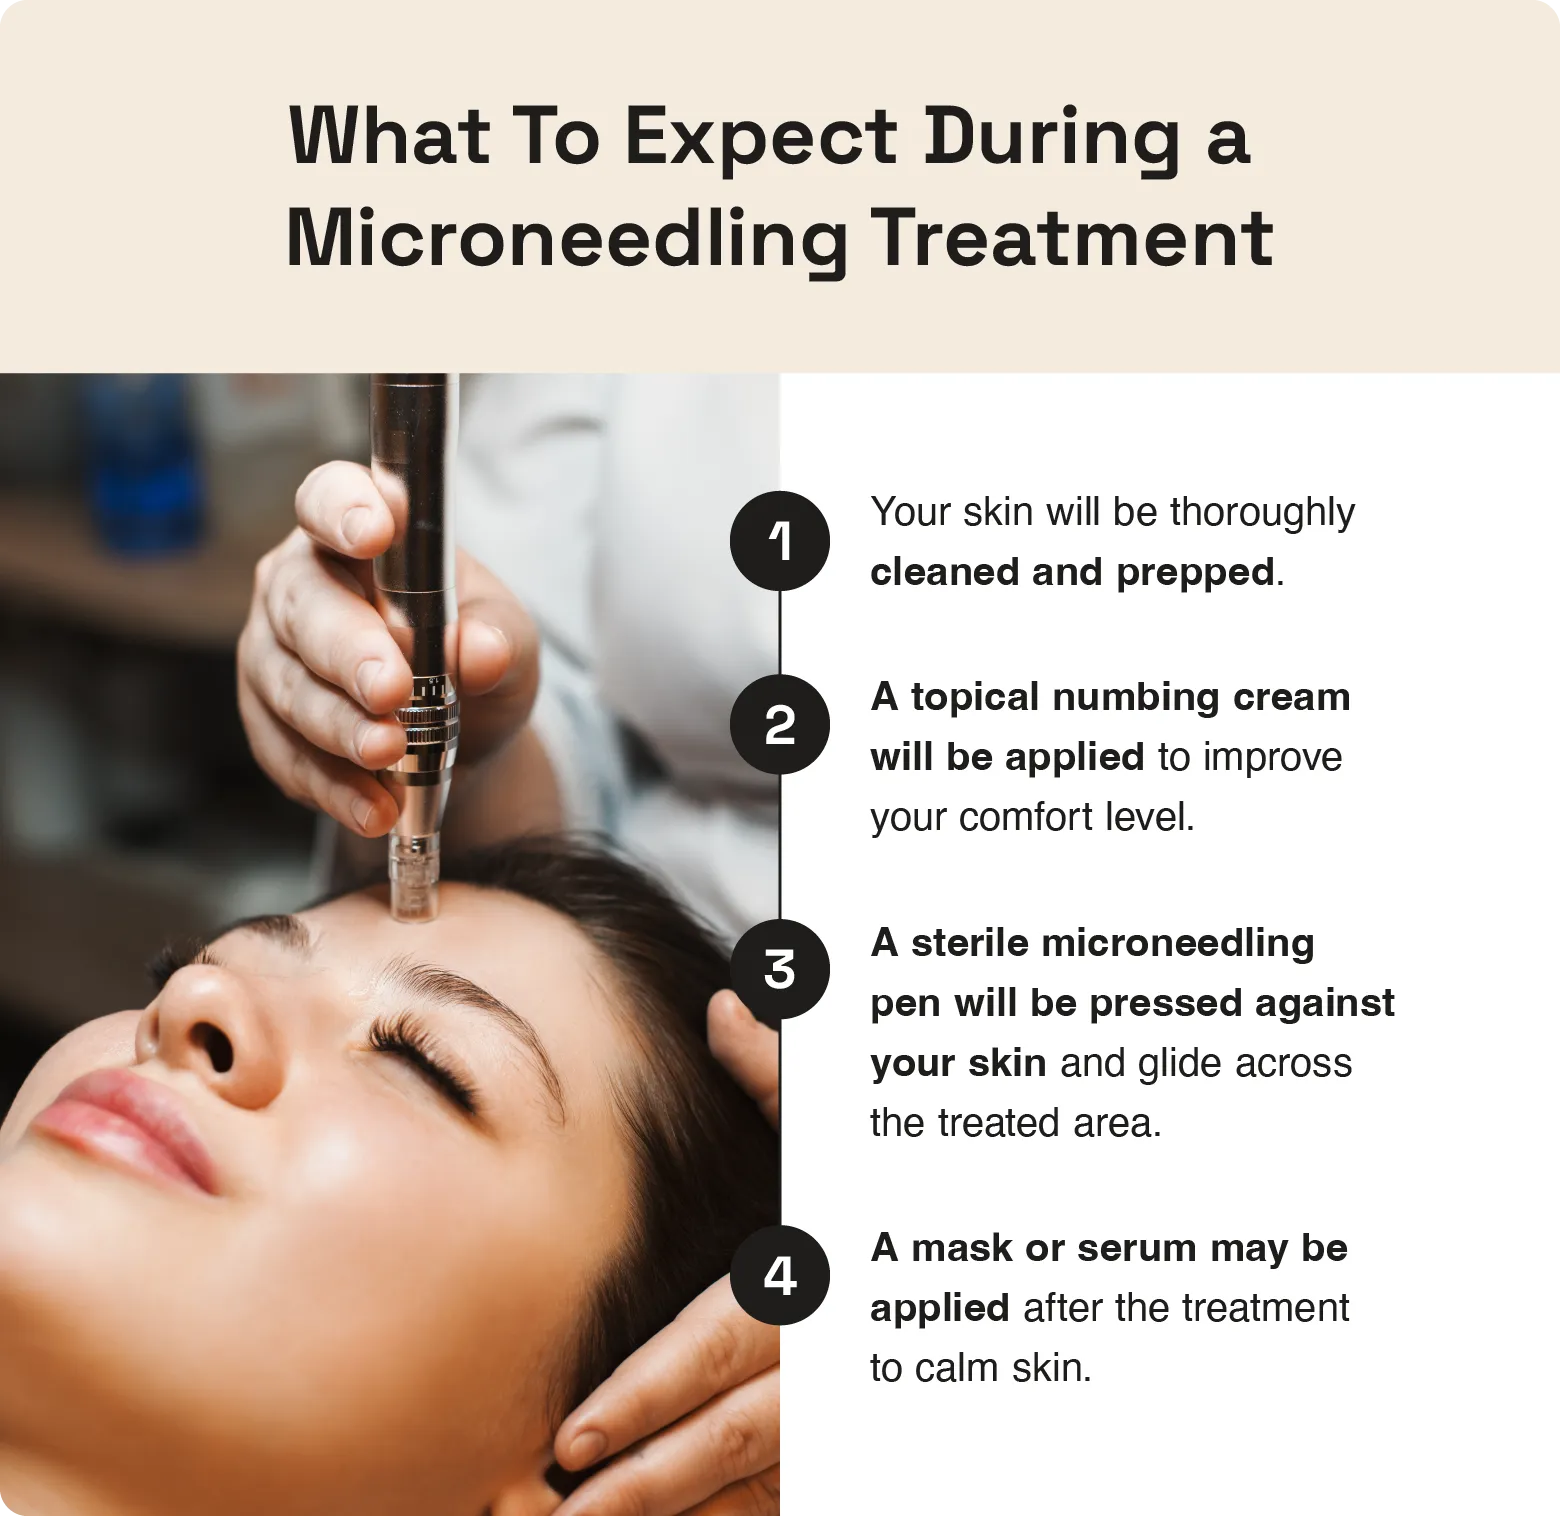 Image shows what to expect during a microneedling appointment. 